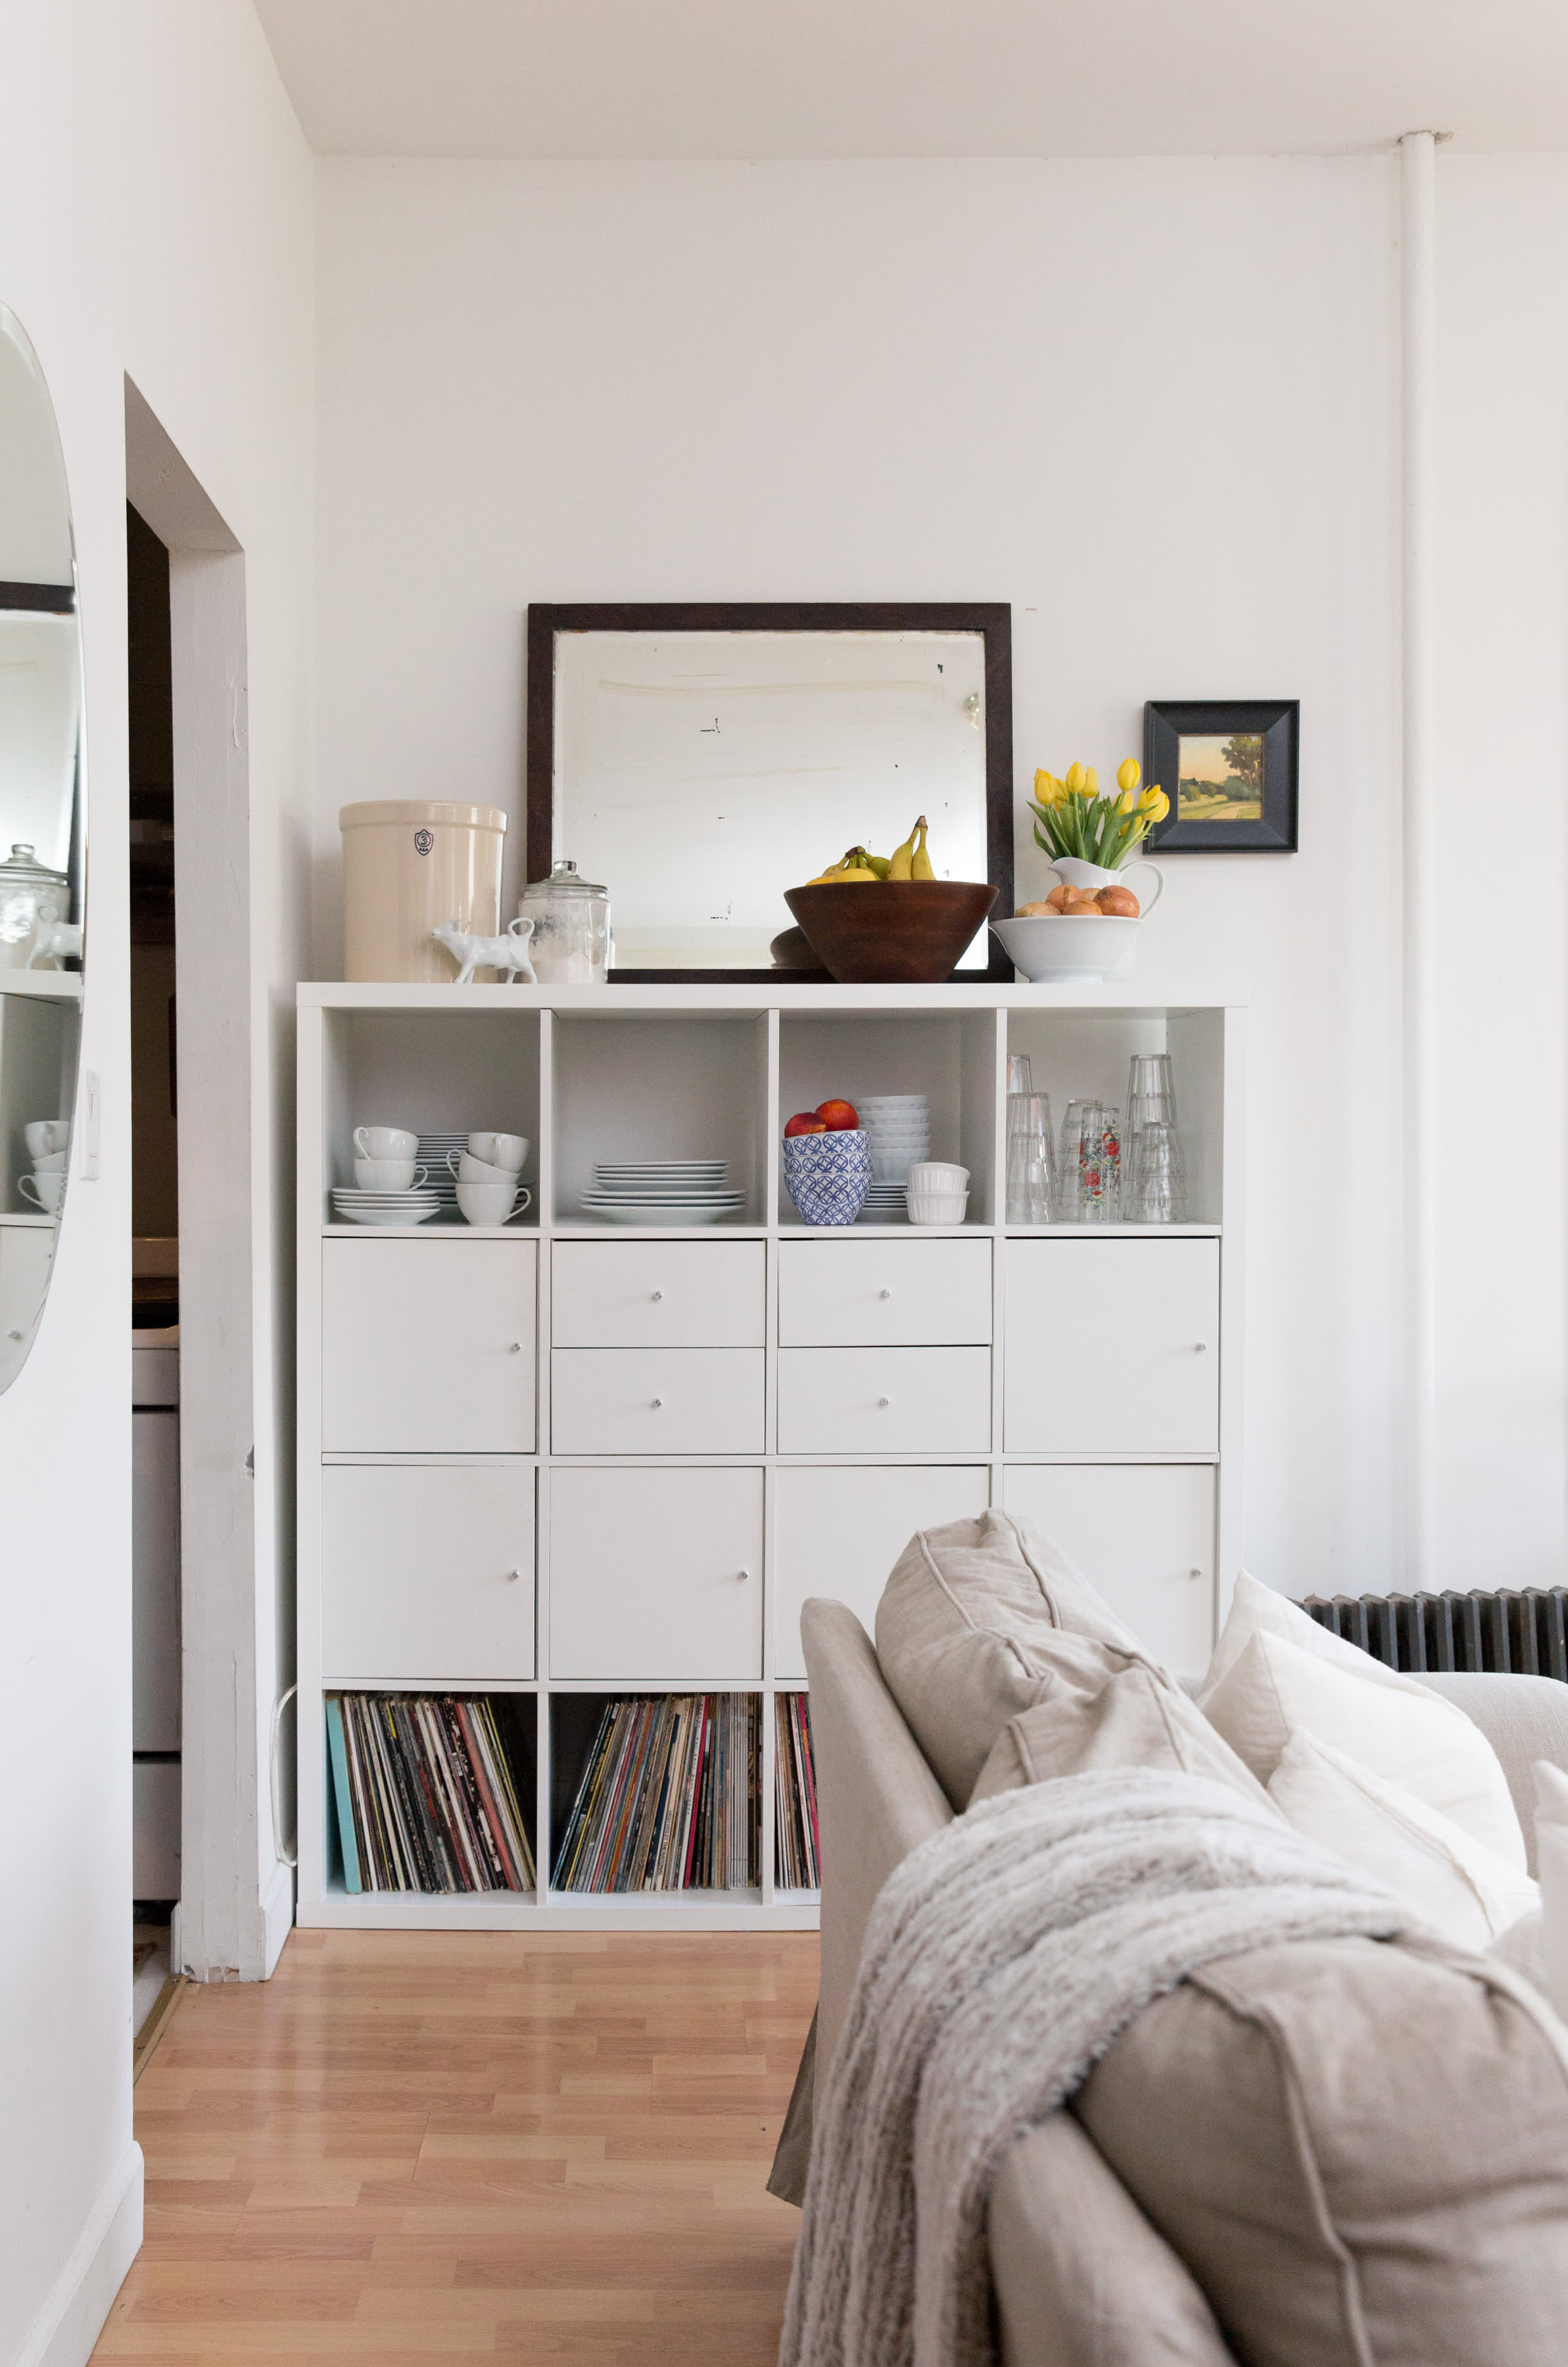 20 Brilliant Storage ideas for small spaces around your house